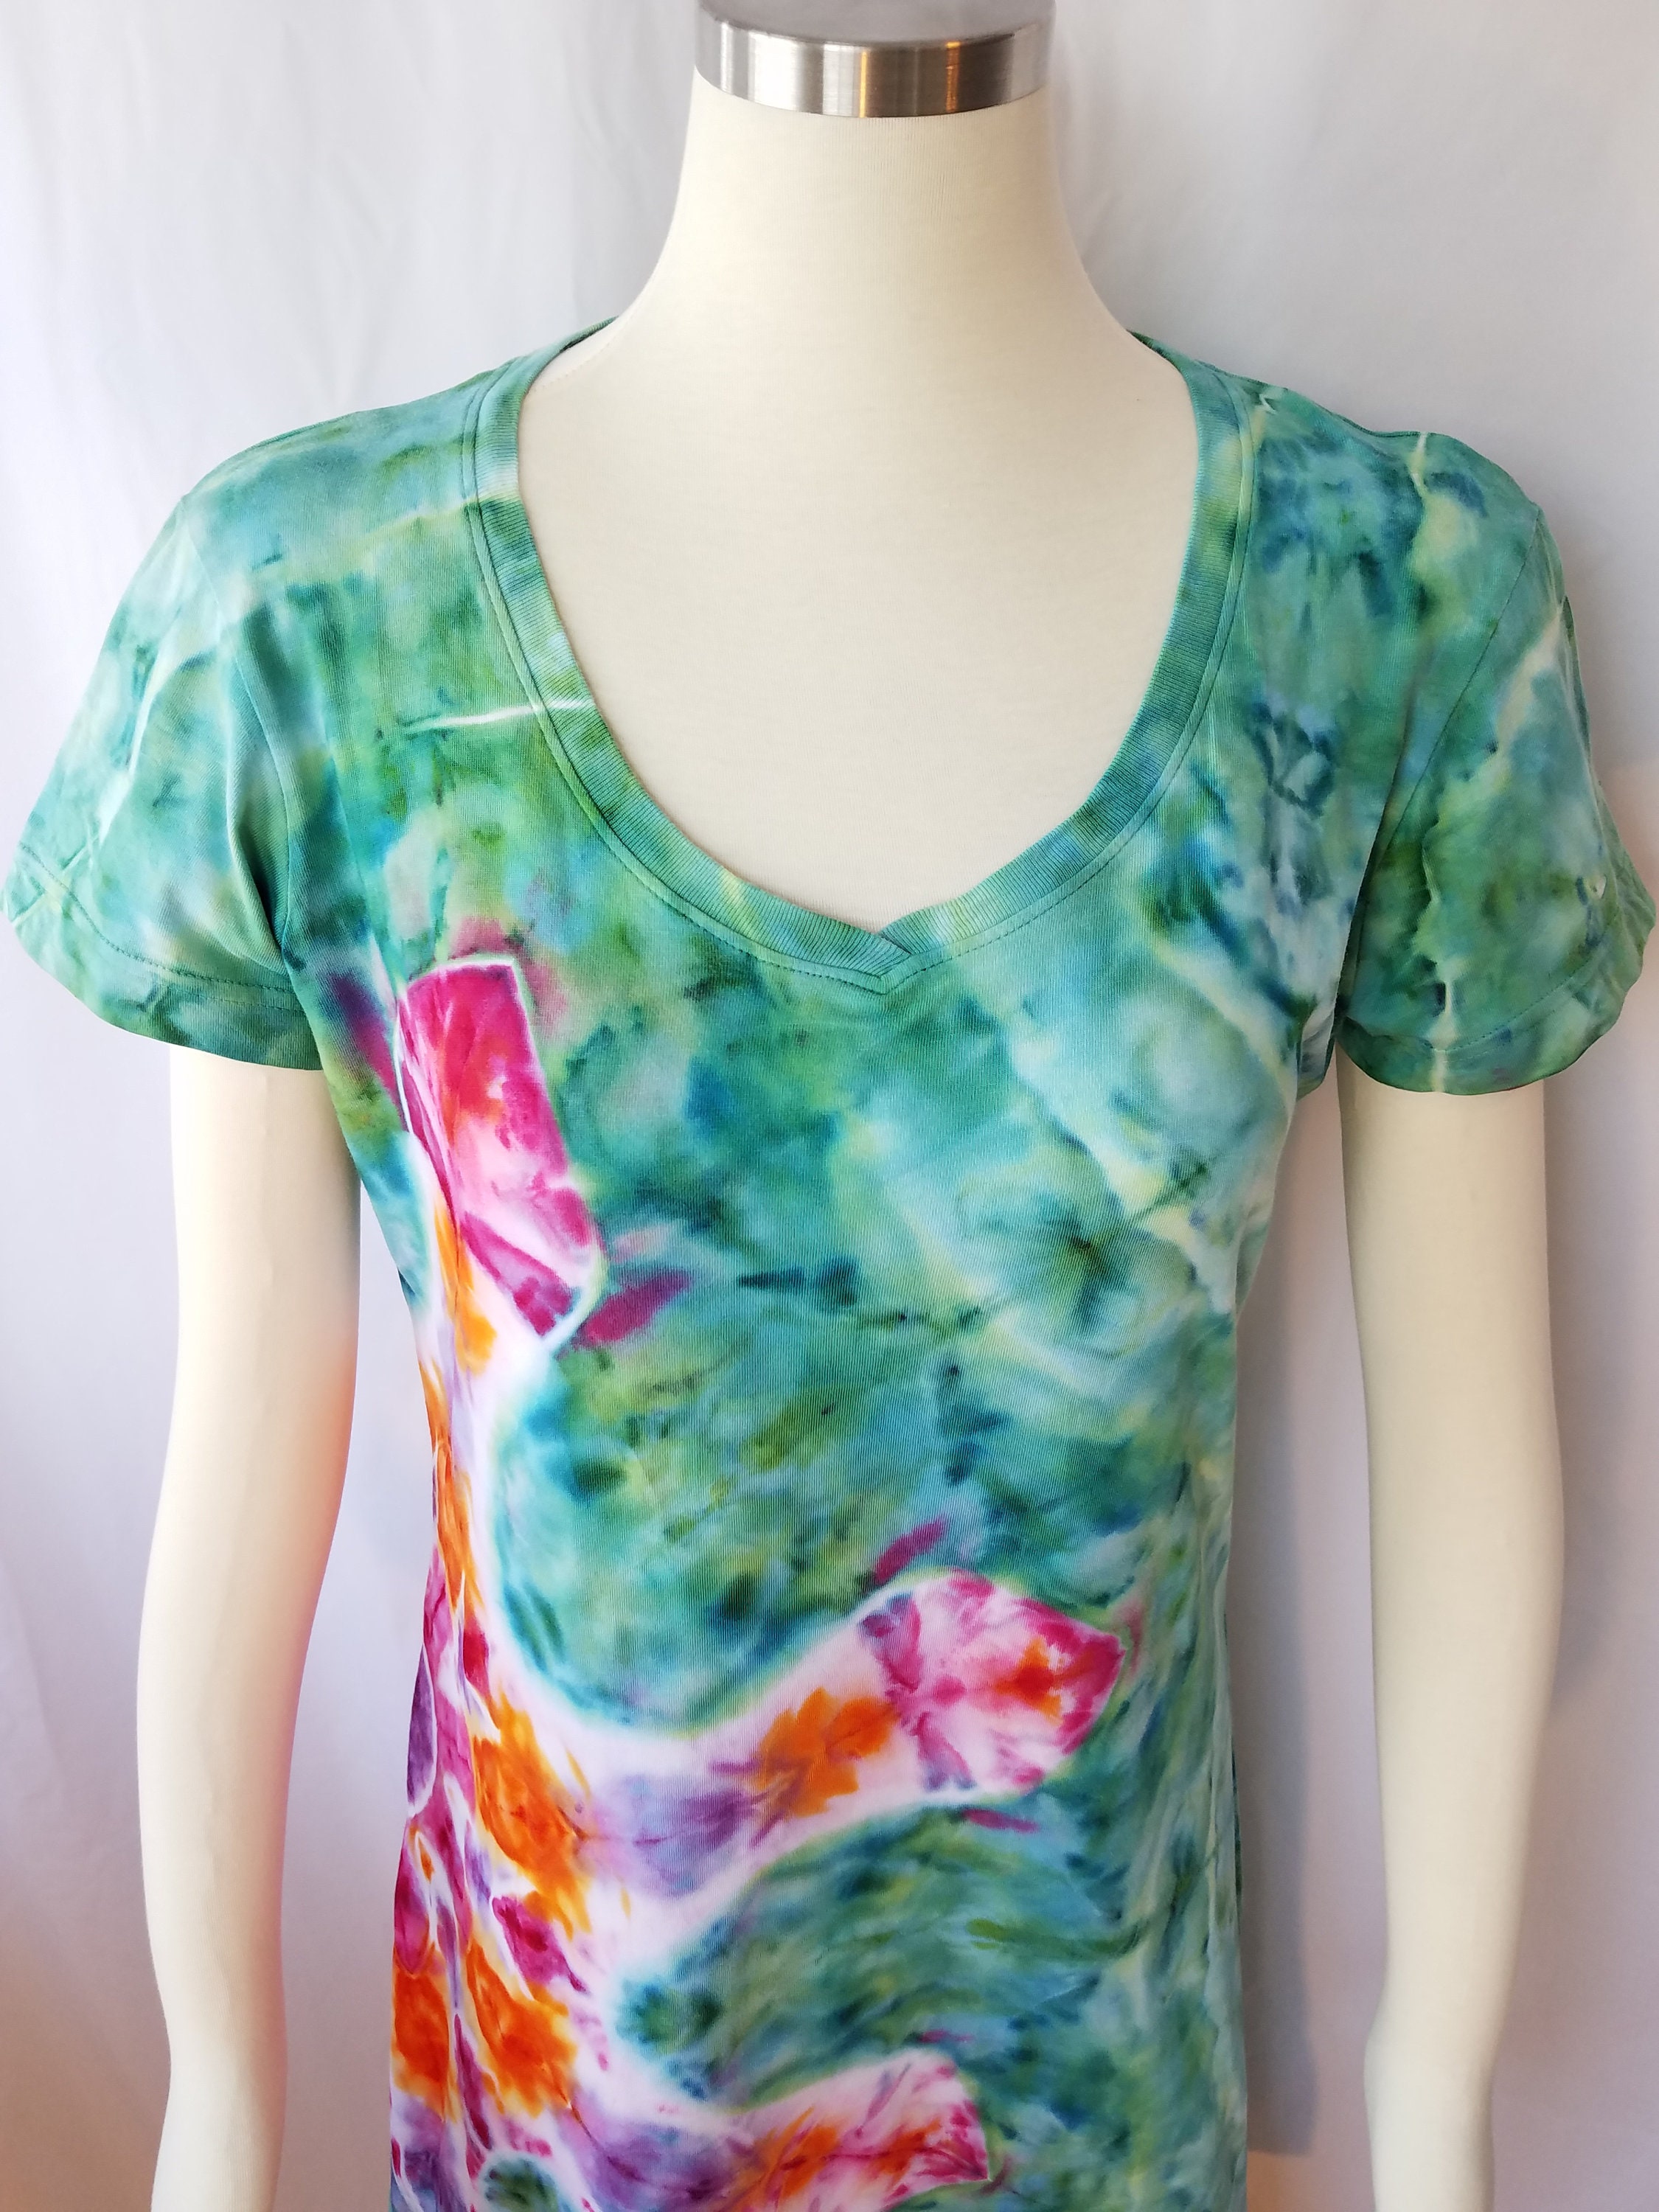 Tie Dye Dress - Cover Up - Size S/M - Night Shirt - Ice Dyed